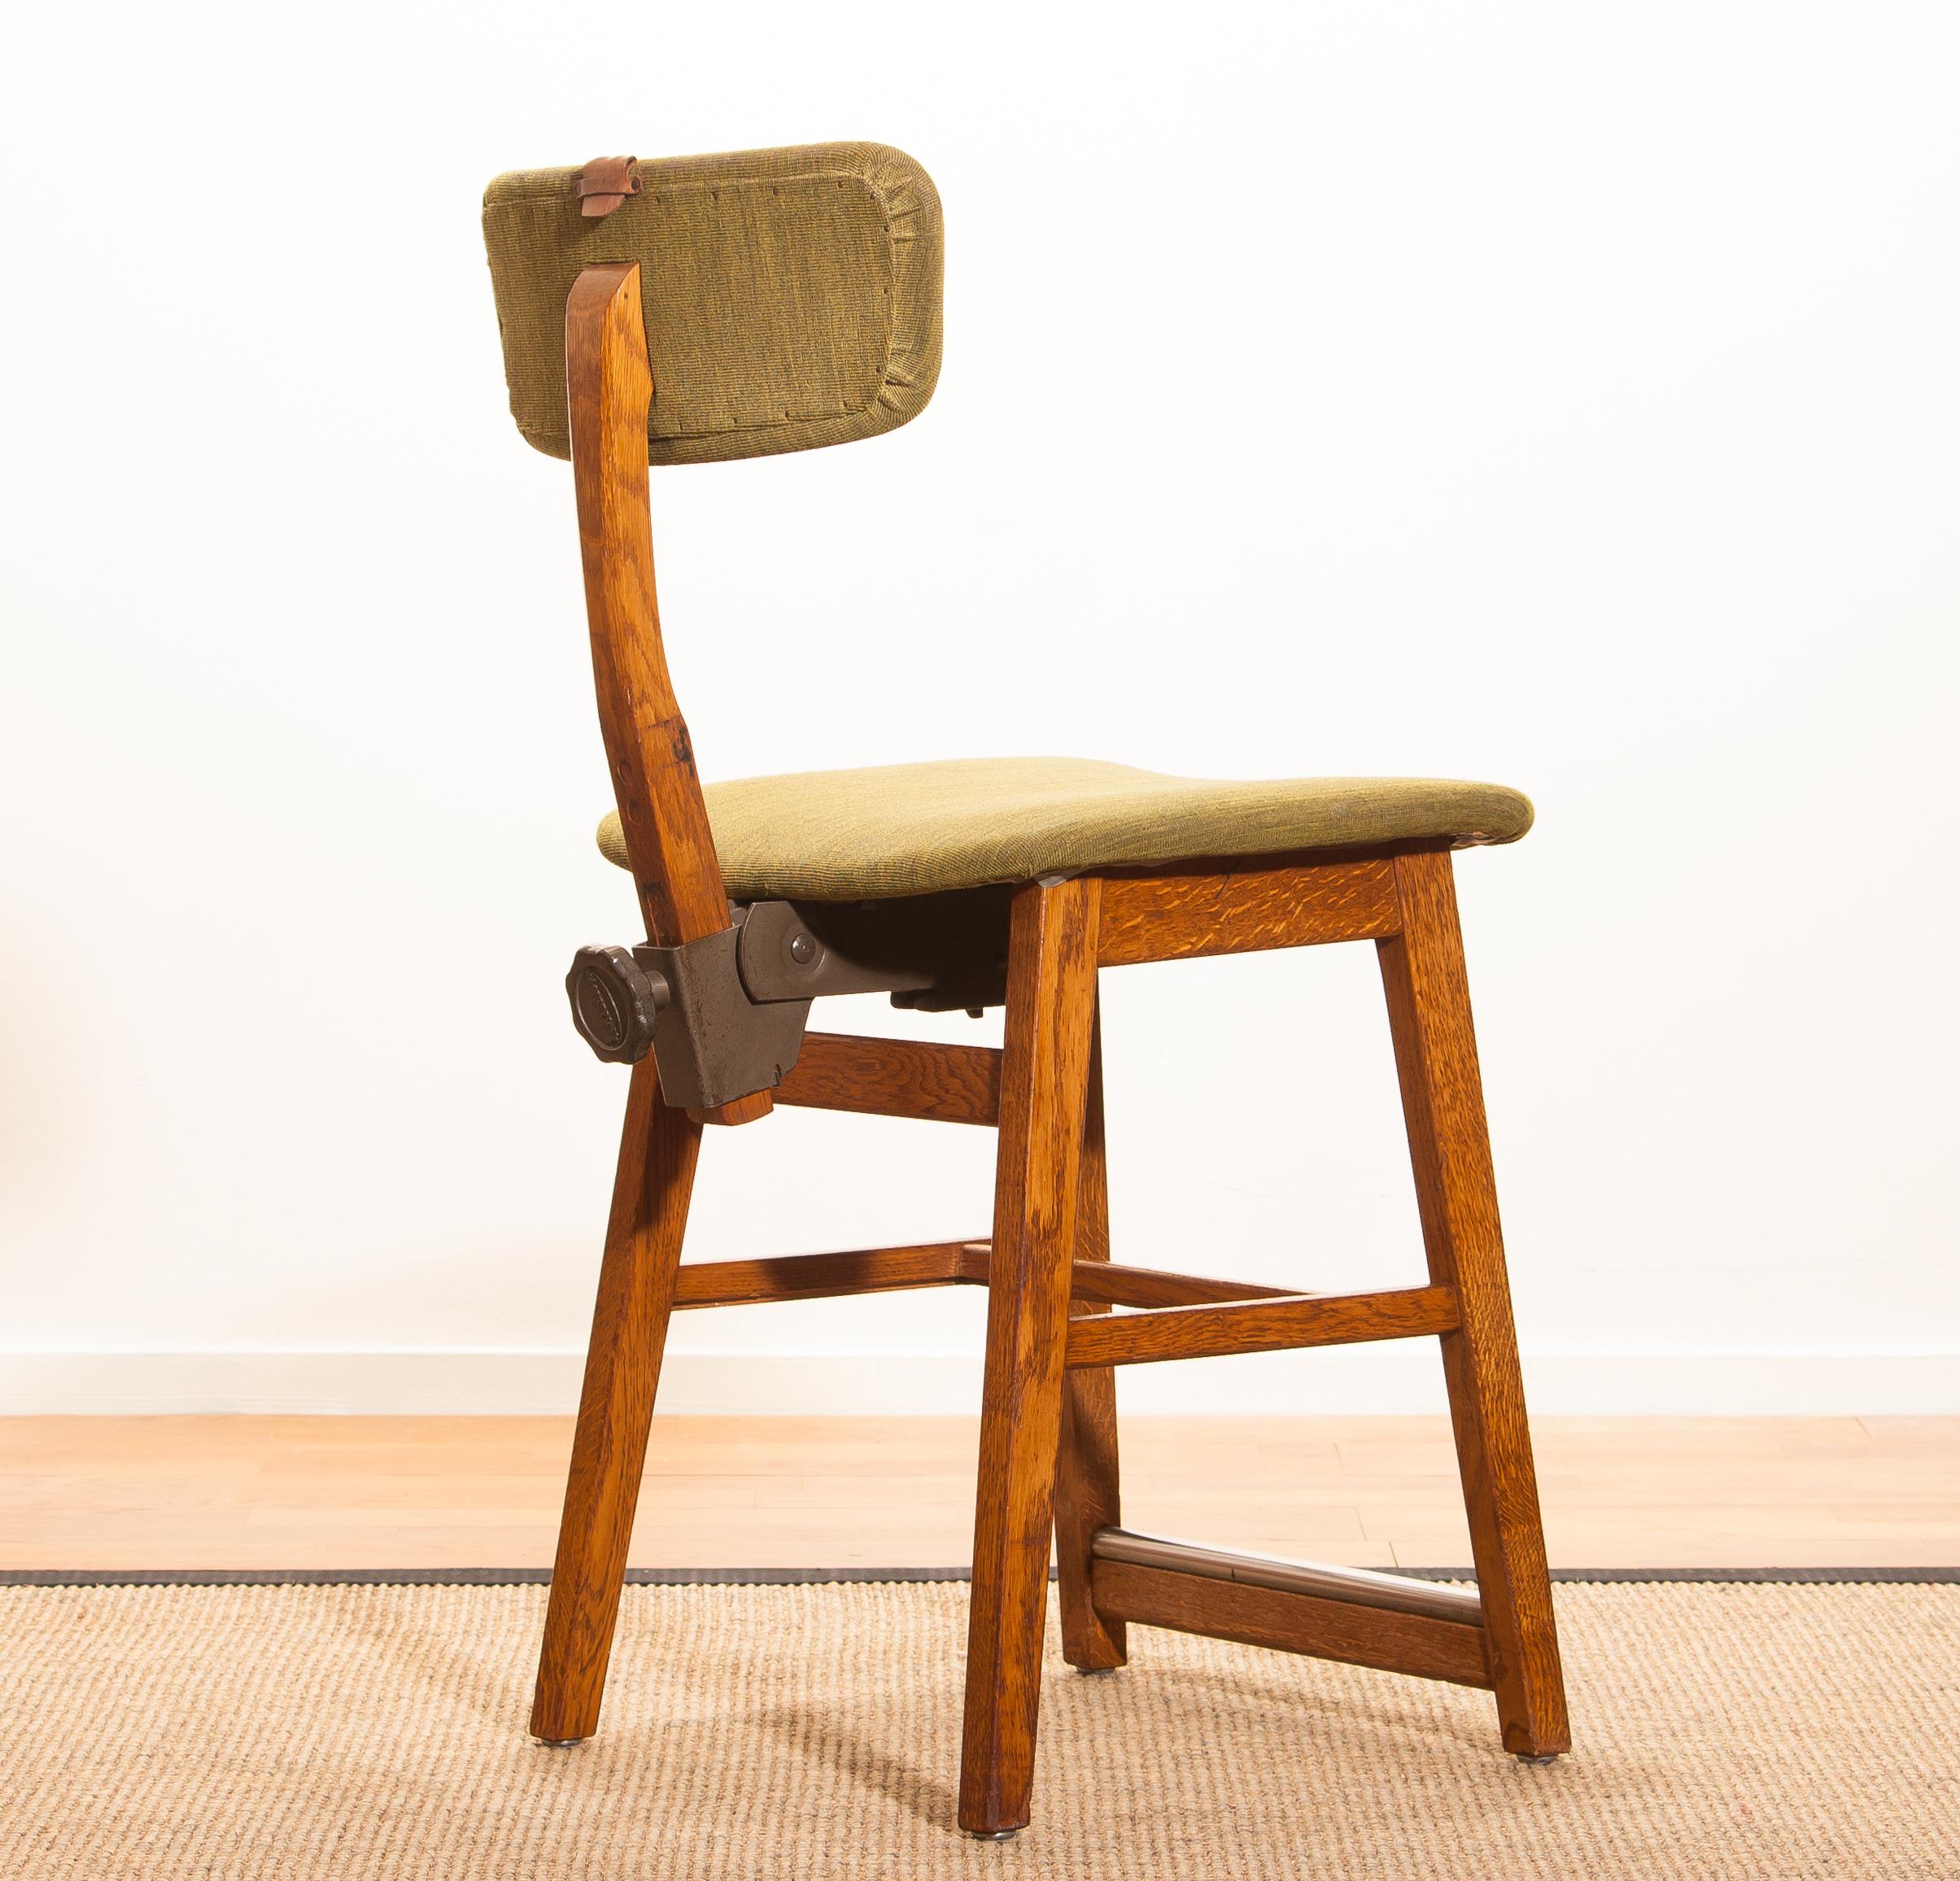 Swedish 1960s, Teak and Wool Desk Chair by Âtvidabergs, Sweden